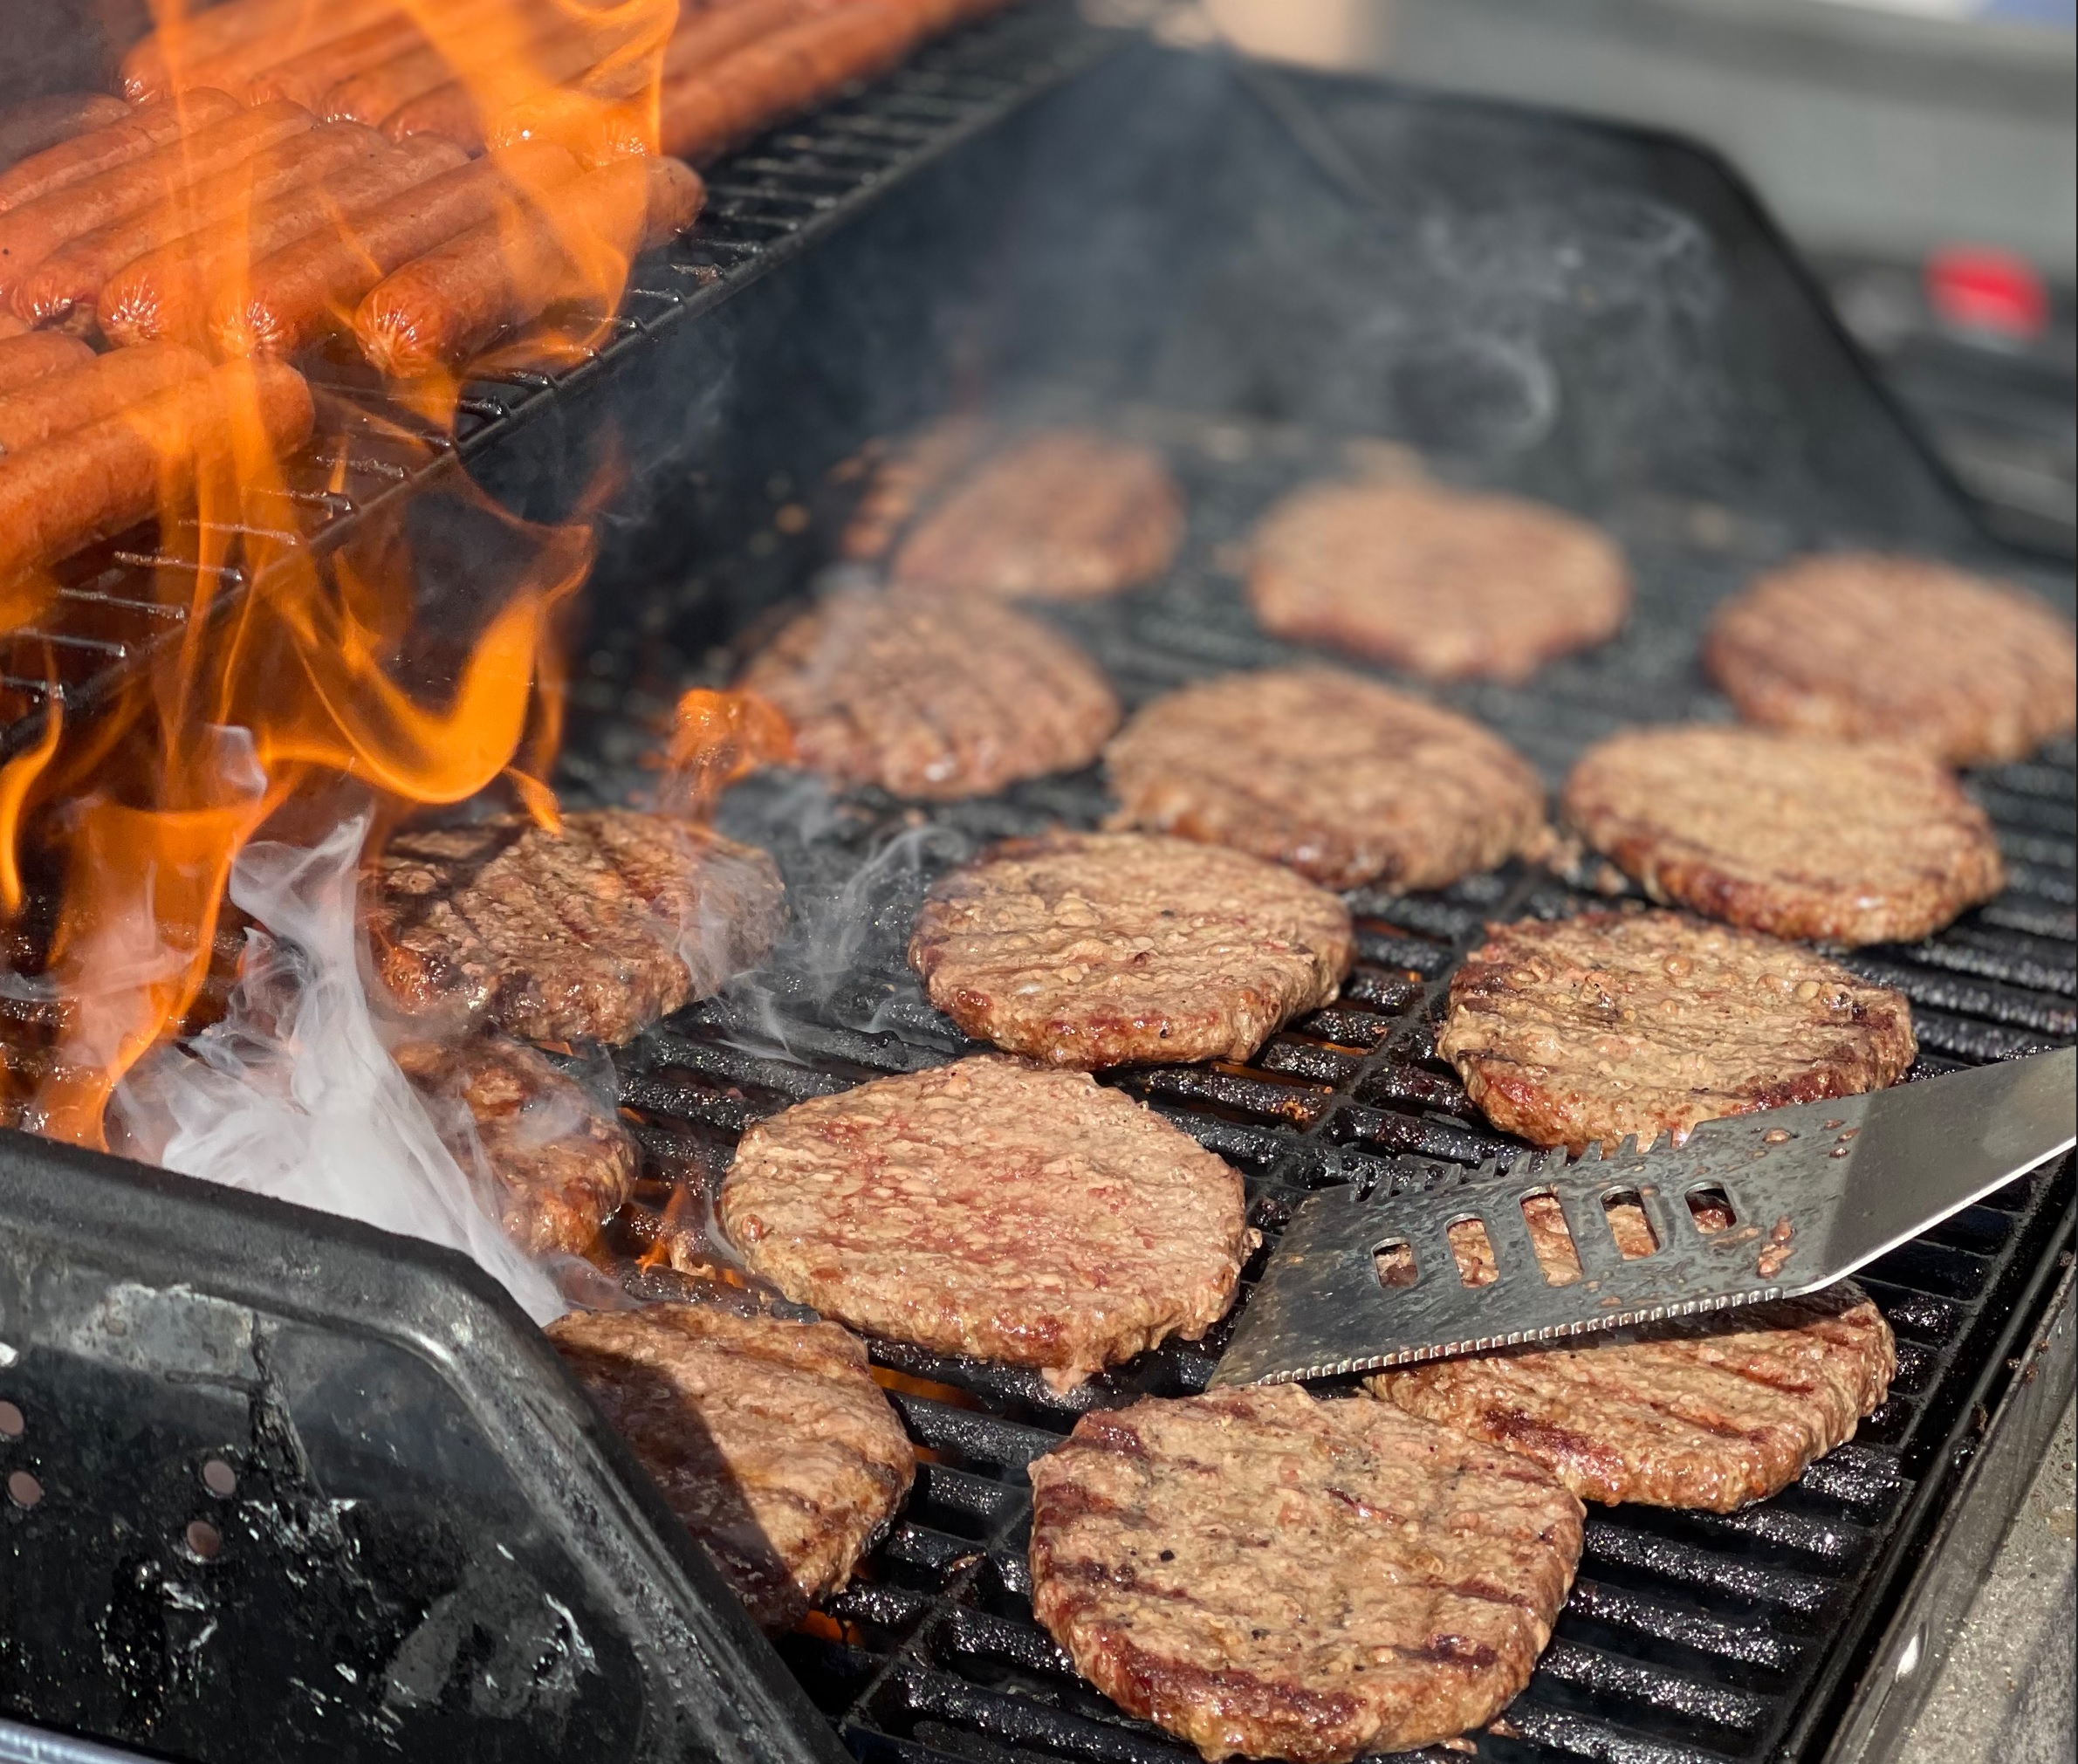 picture of food on the grill at the charity event